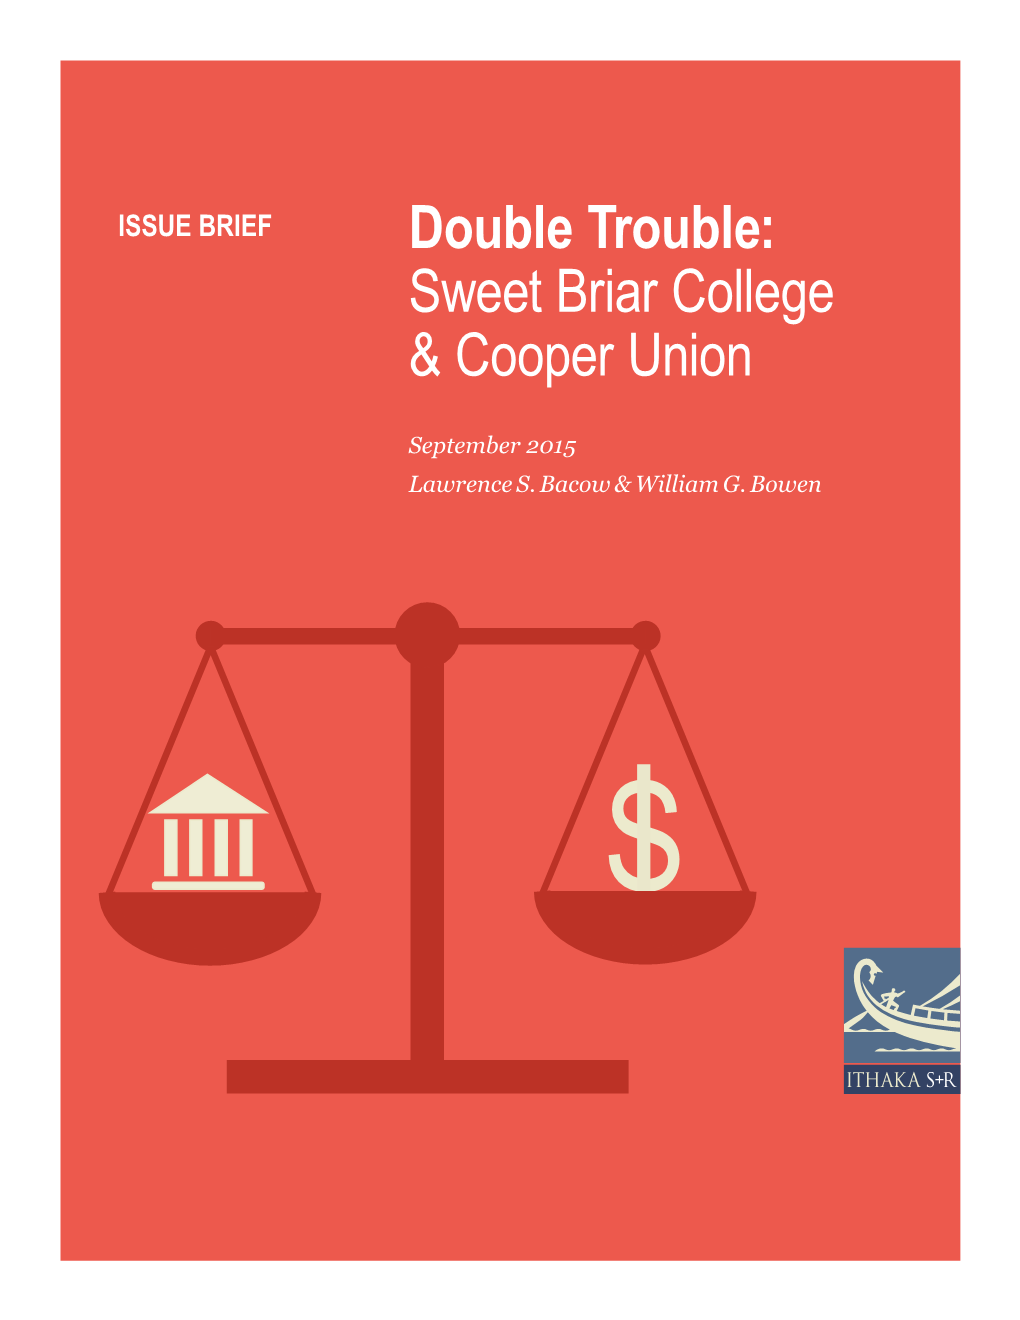 Double Trouble: Sweet Briar College & Cooper Union